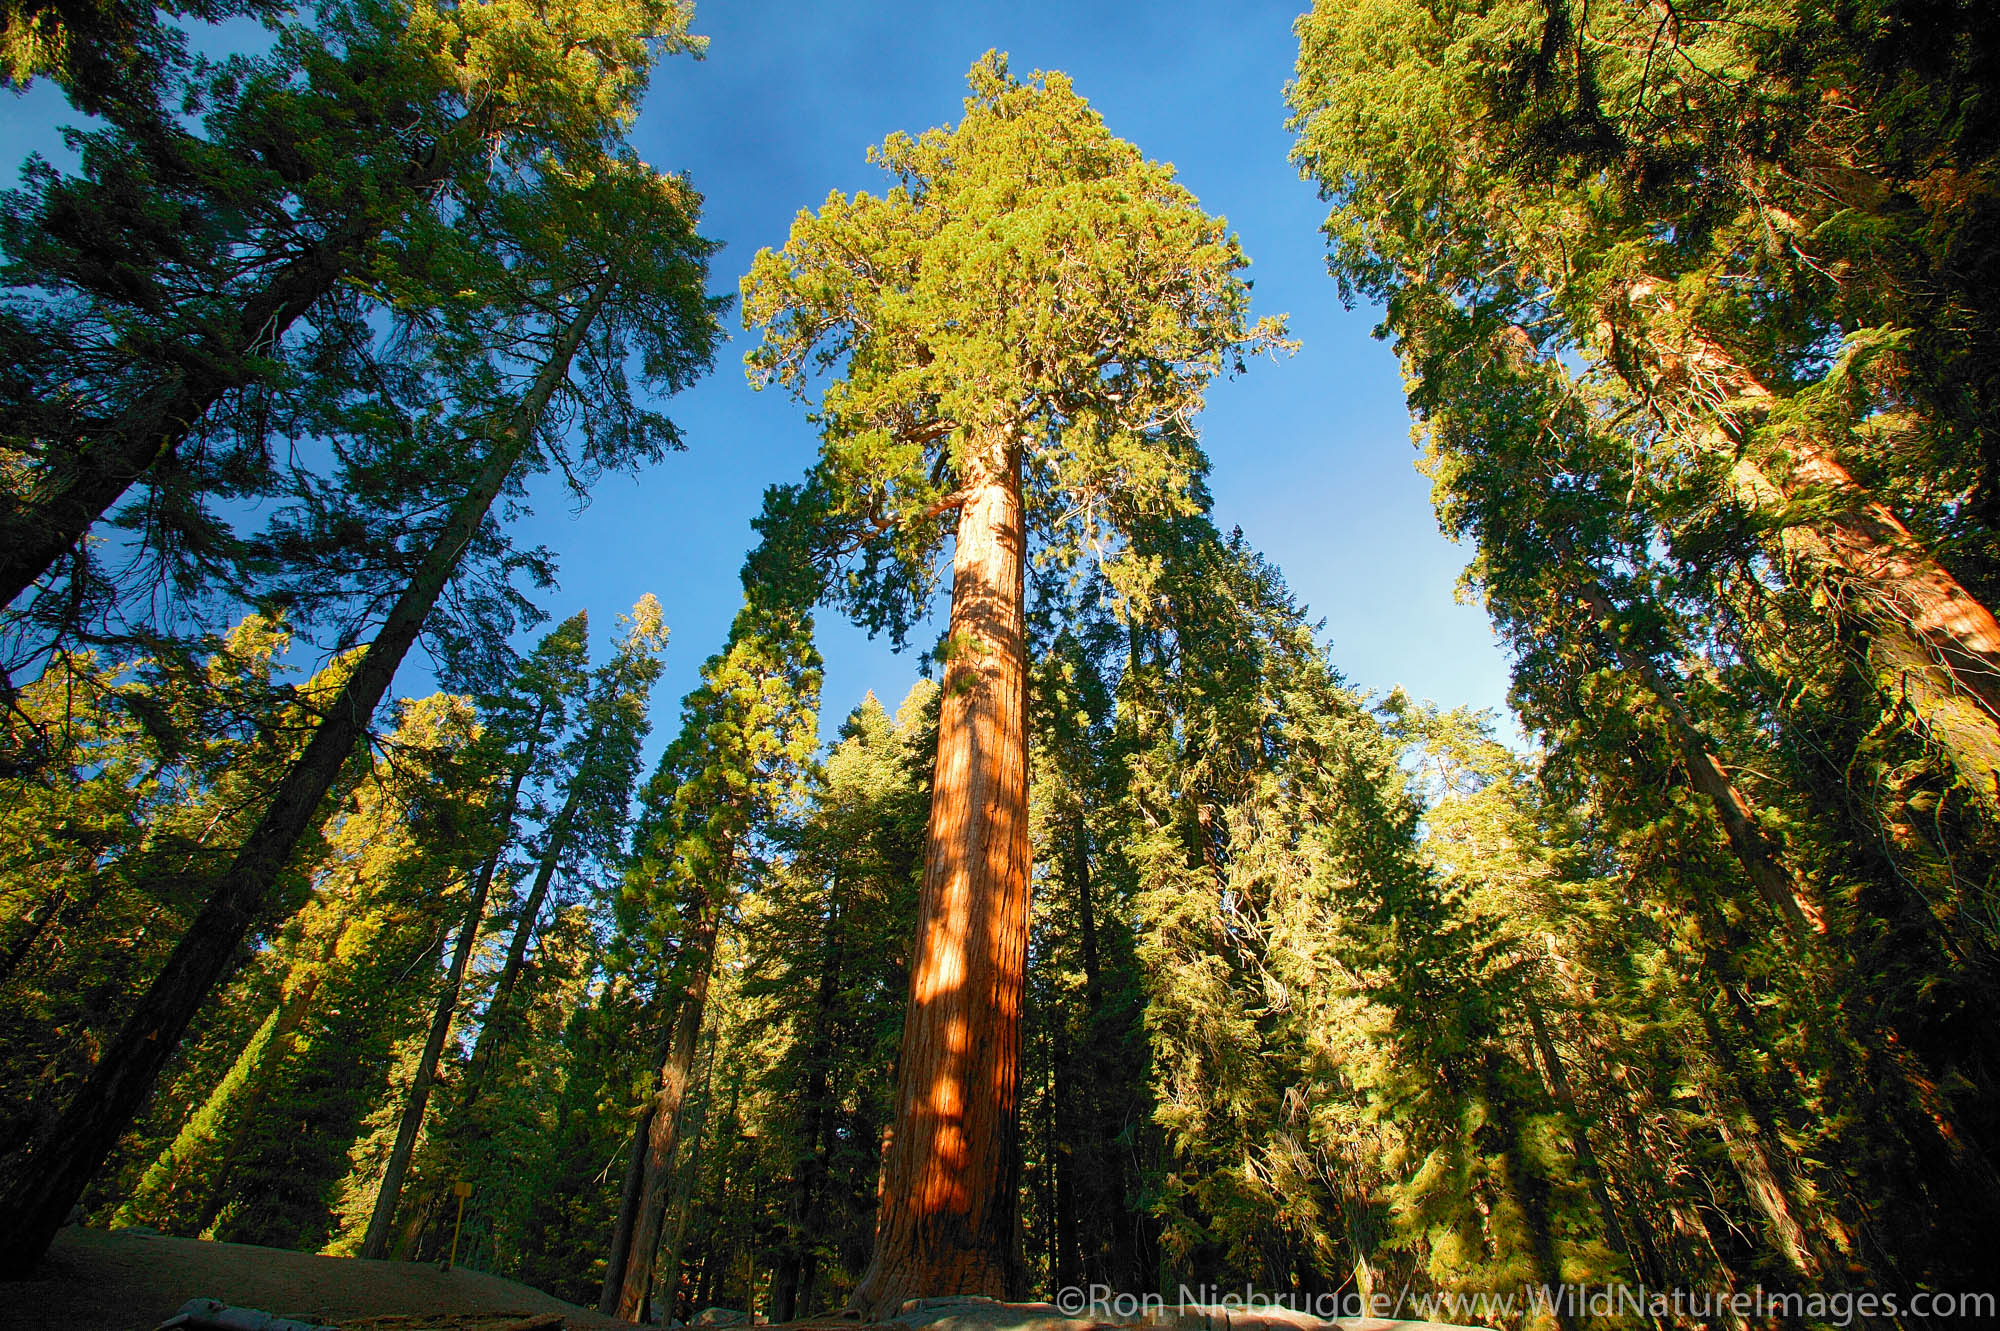 The giant Sequoia trees in Sequoia National Park, California.